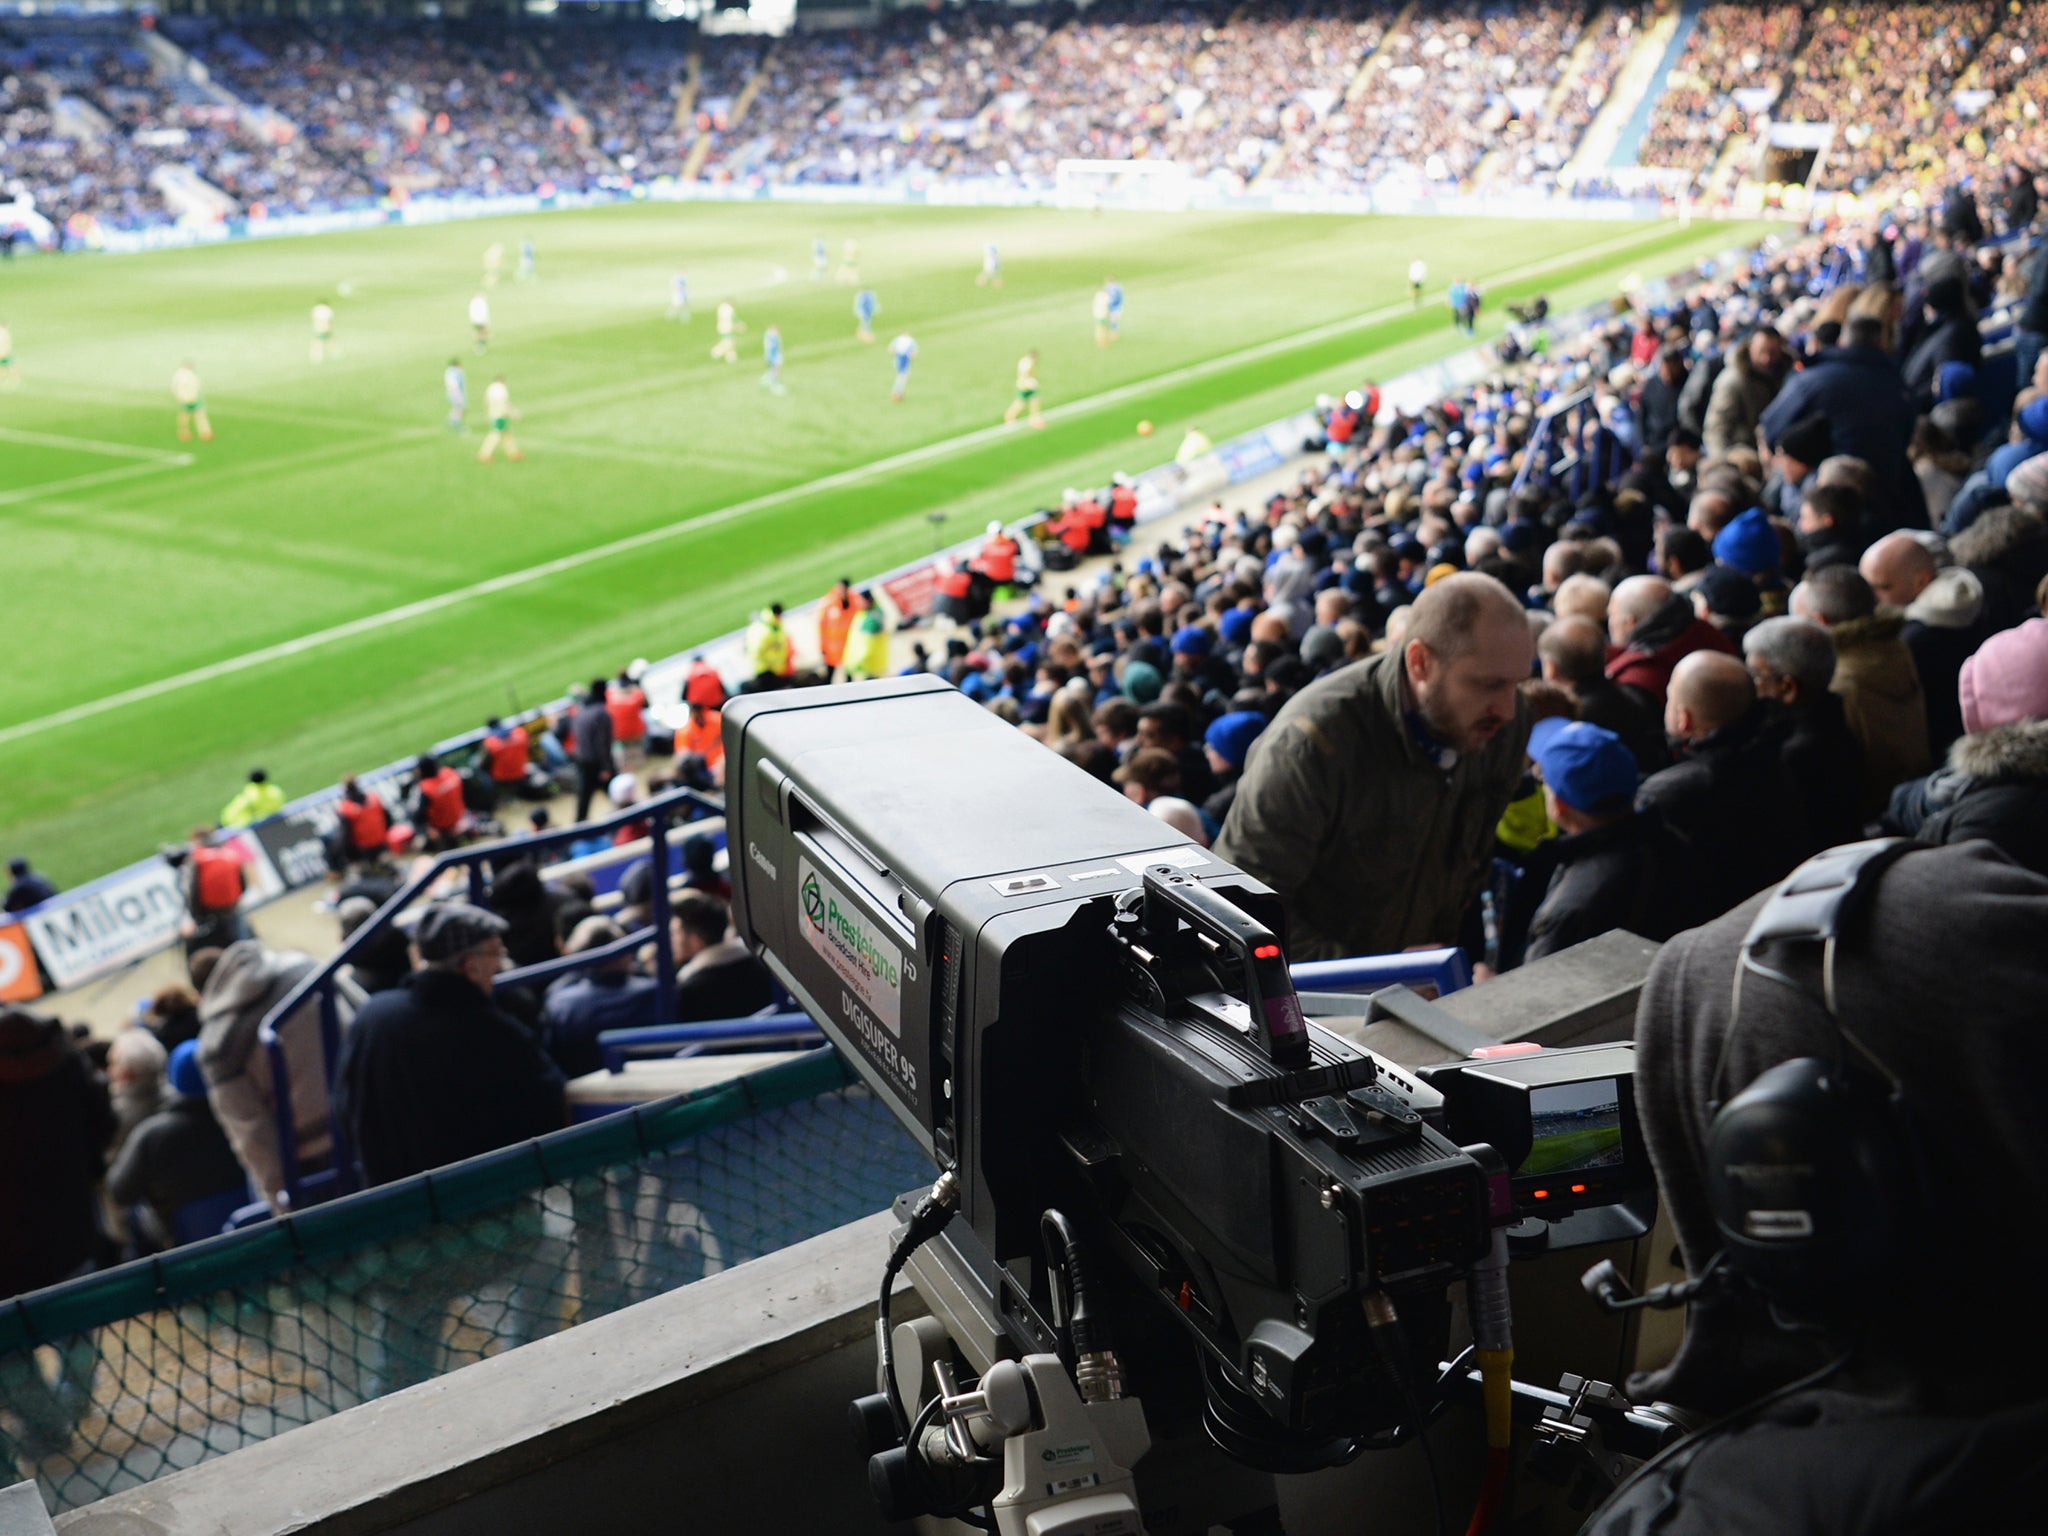 Amazon buys Premier League broadcast rights from 2019